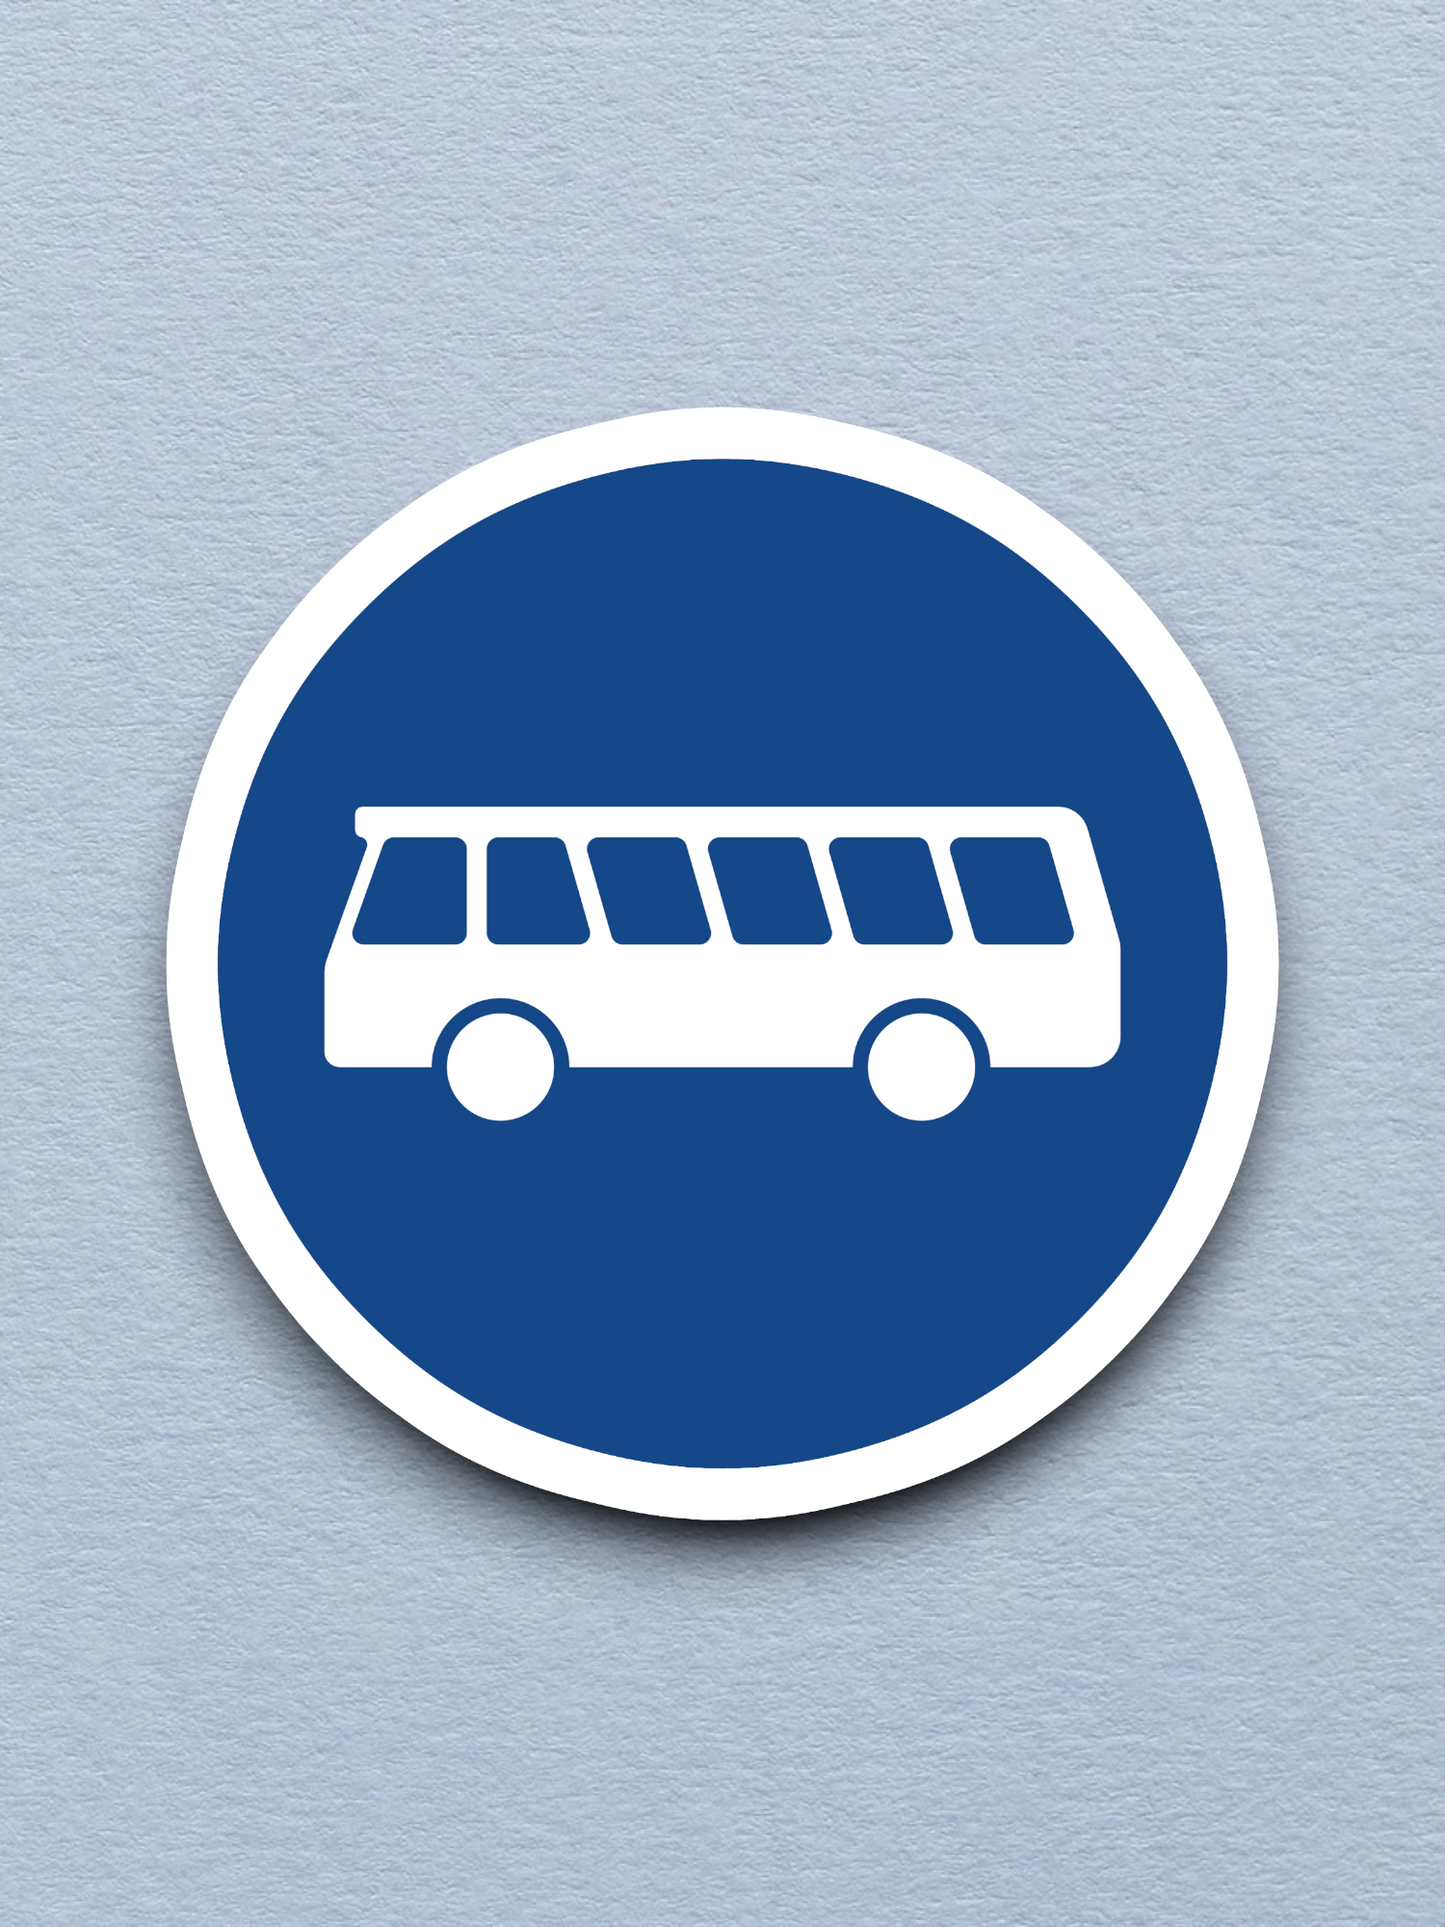 Bus Zone Ahead Road Sign Sticker